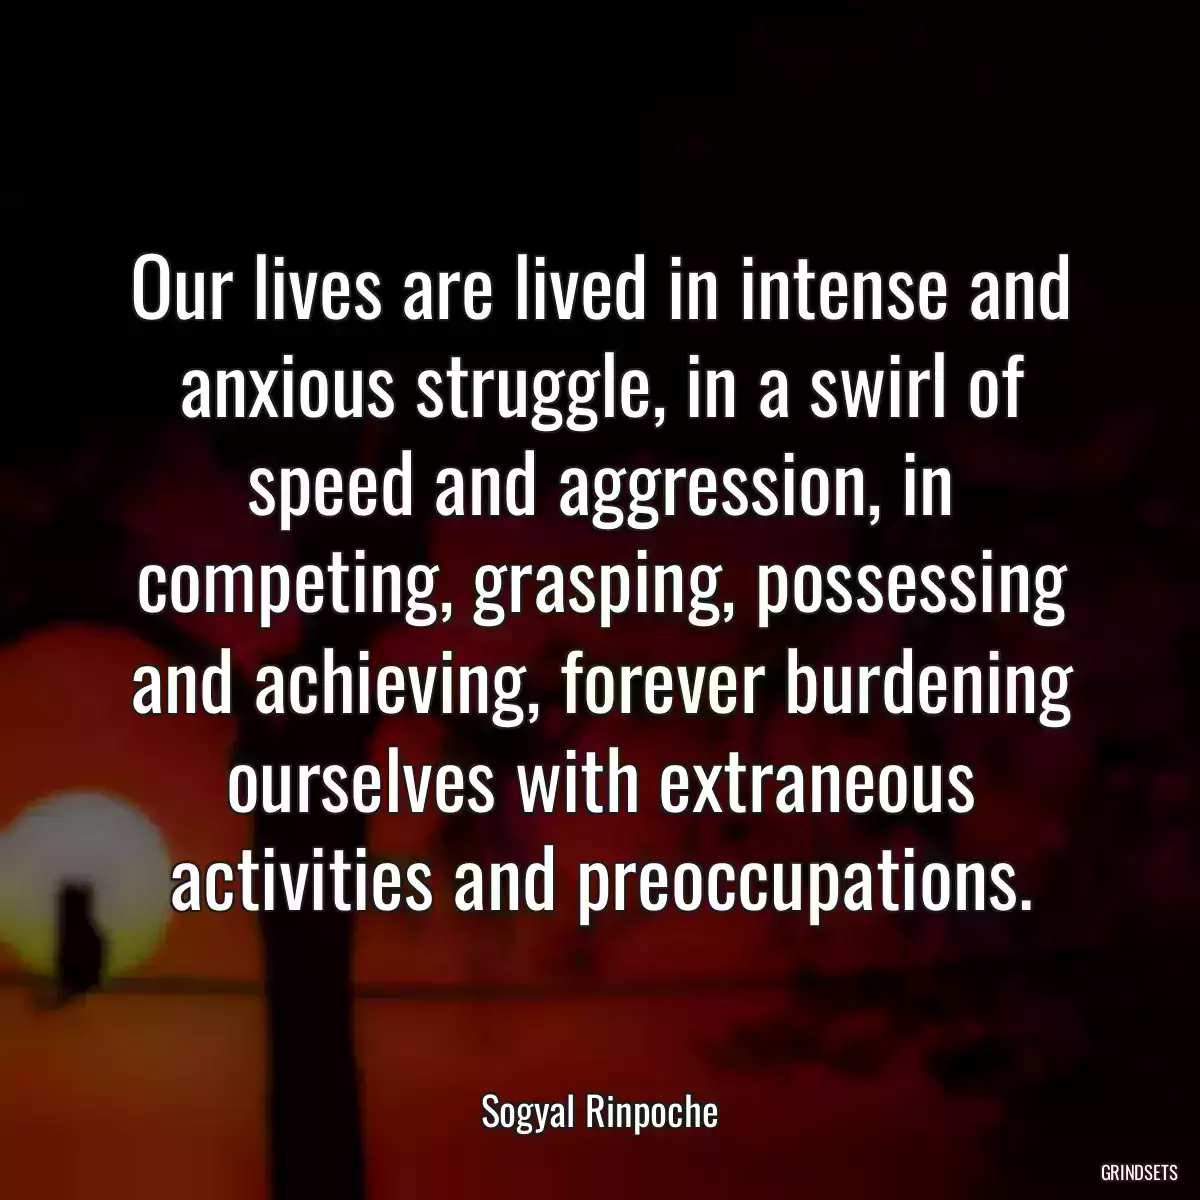 Our lives are lived in intense and anxious struggle, in a swirl of speed and aggression, in competing, grasping, possessing and achieving, forever burdening ourselves with extraneous activities and preoccupations.